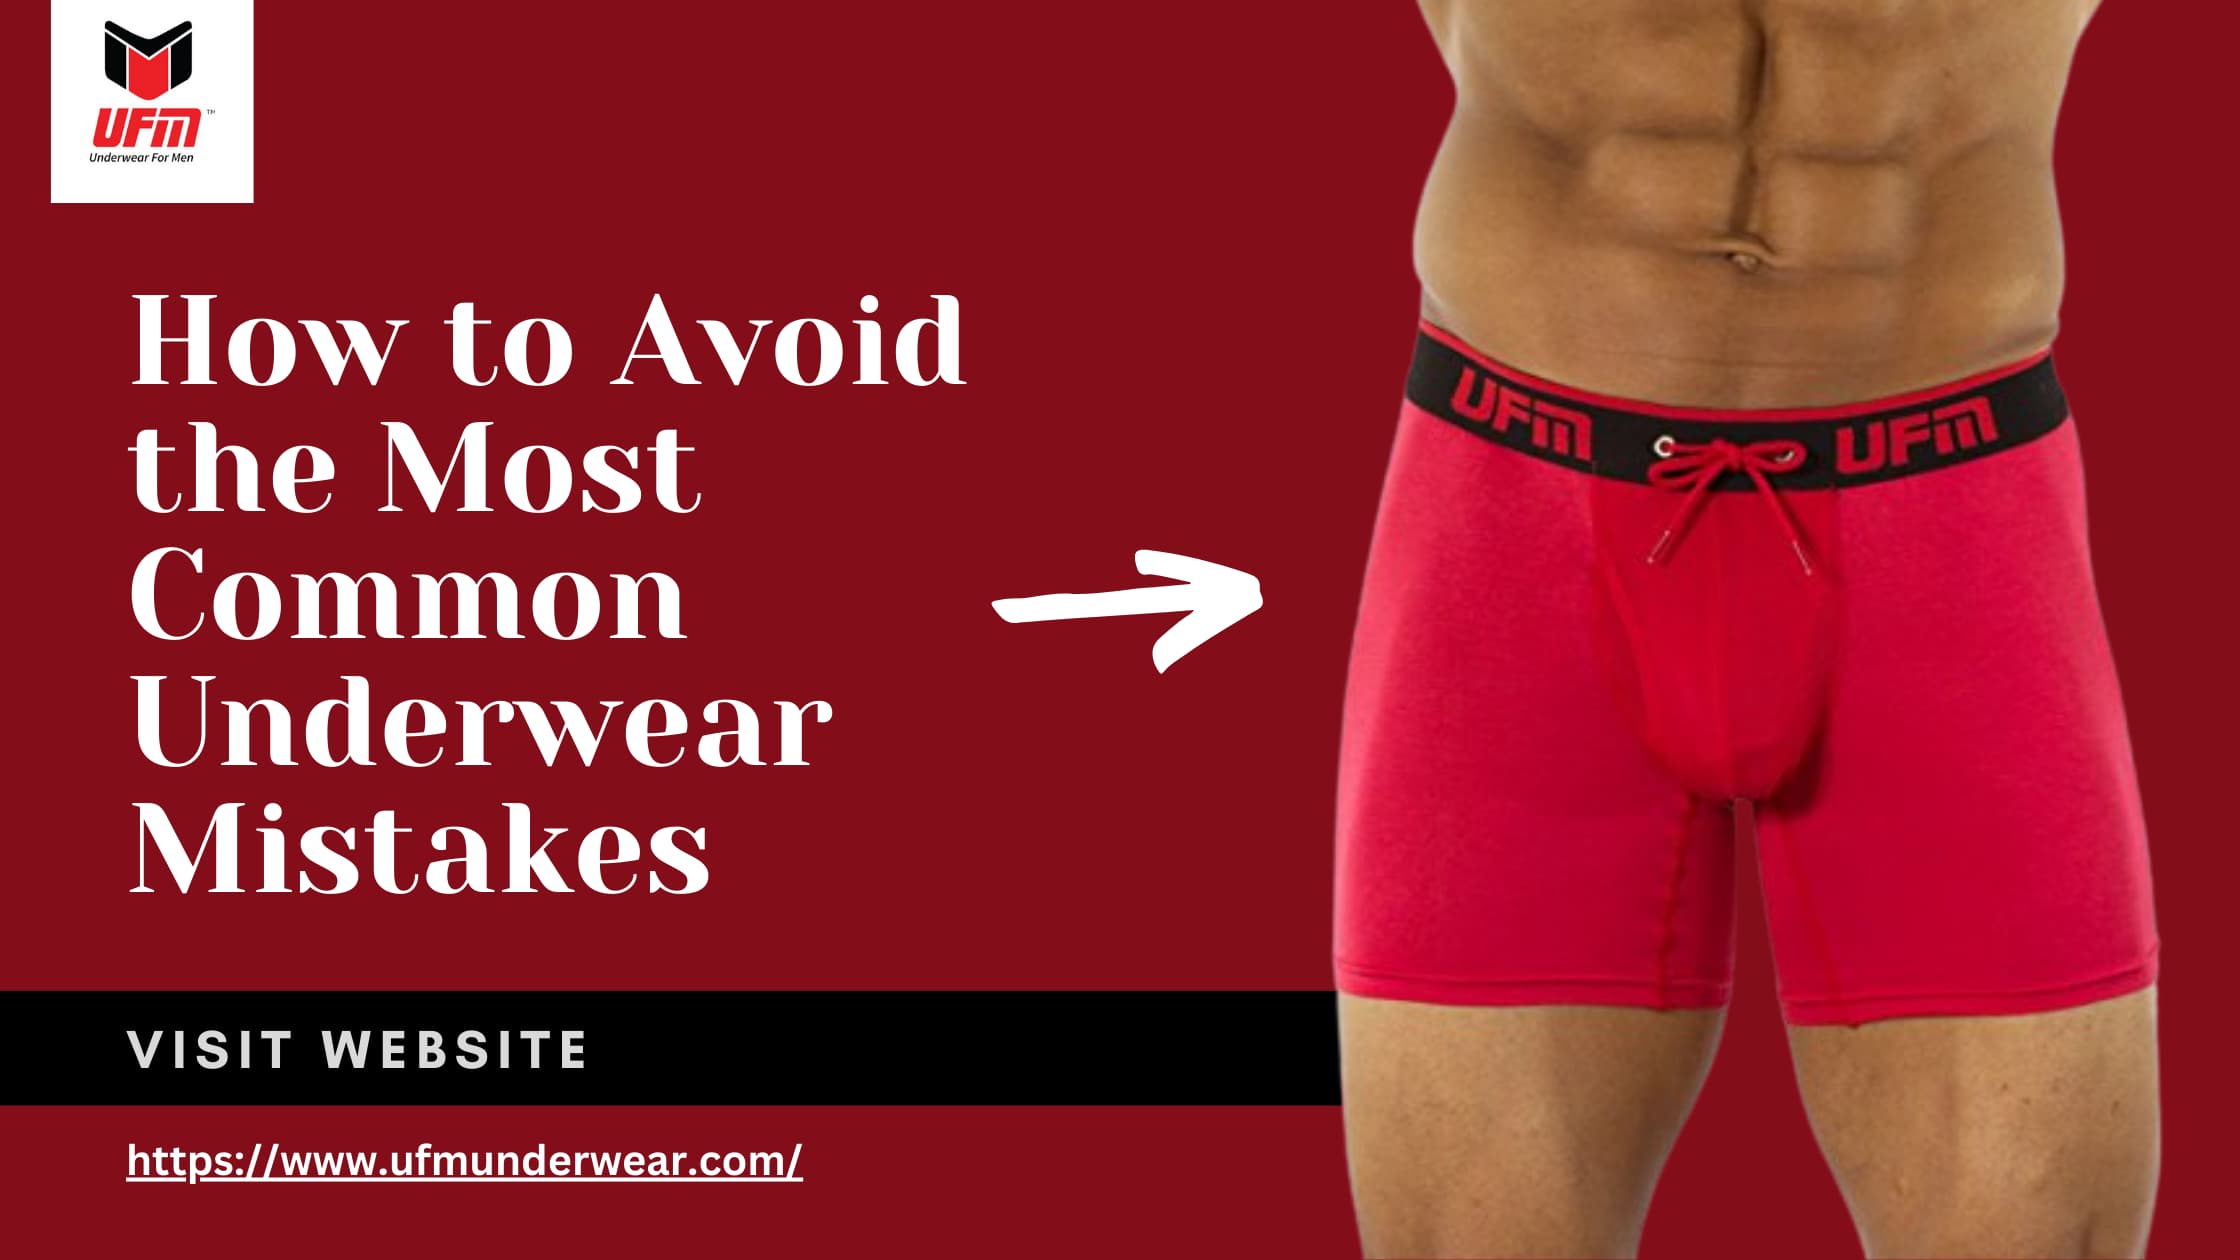 Why does underwear damage so quickly? - Quora